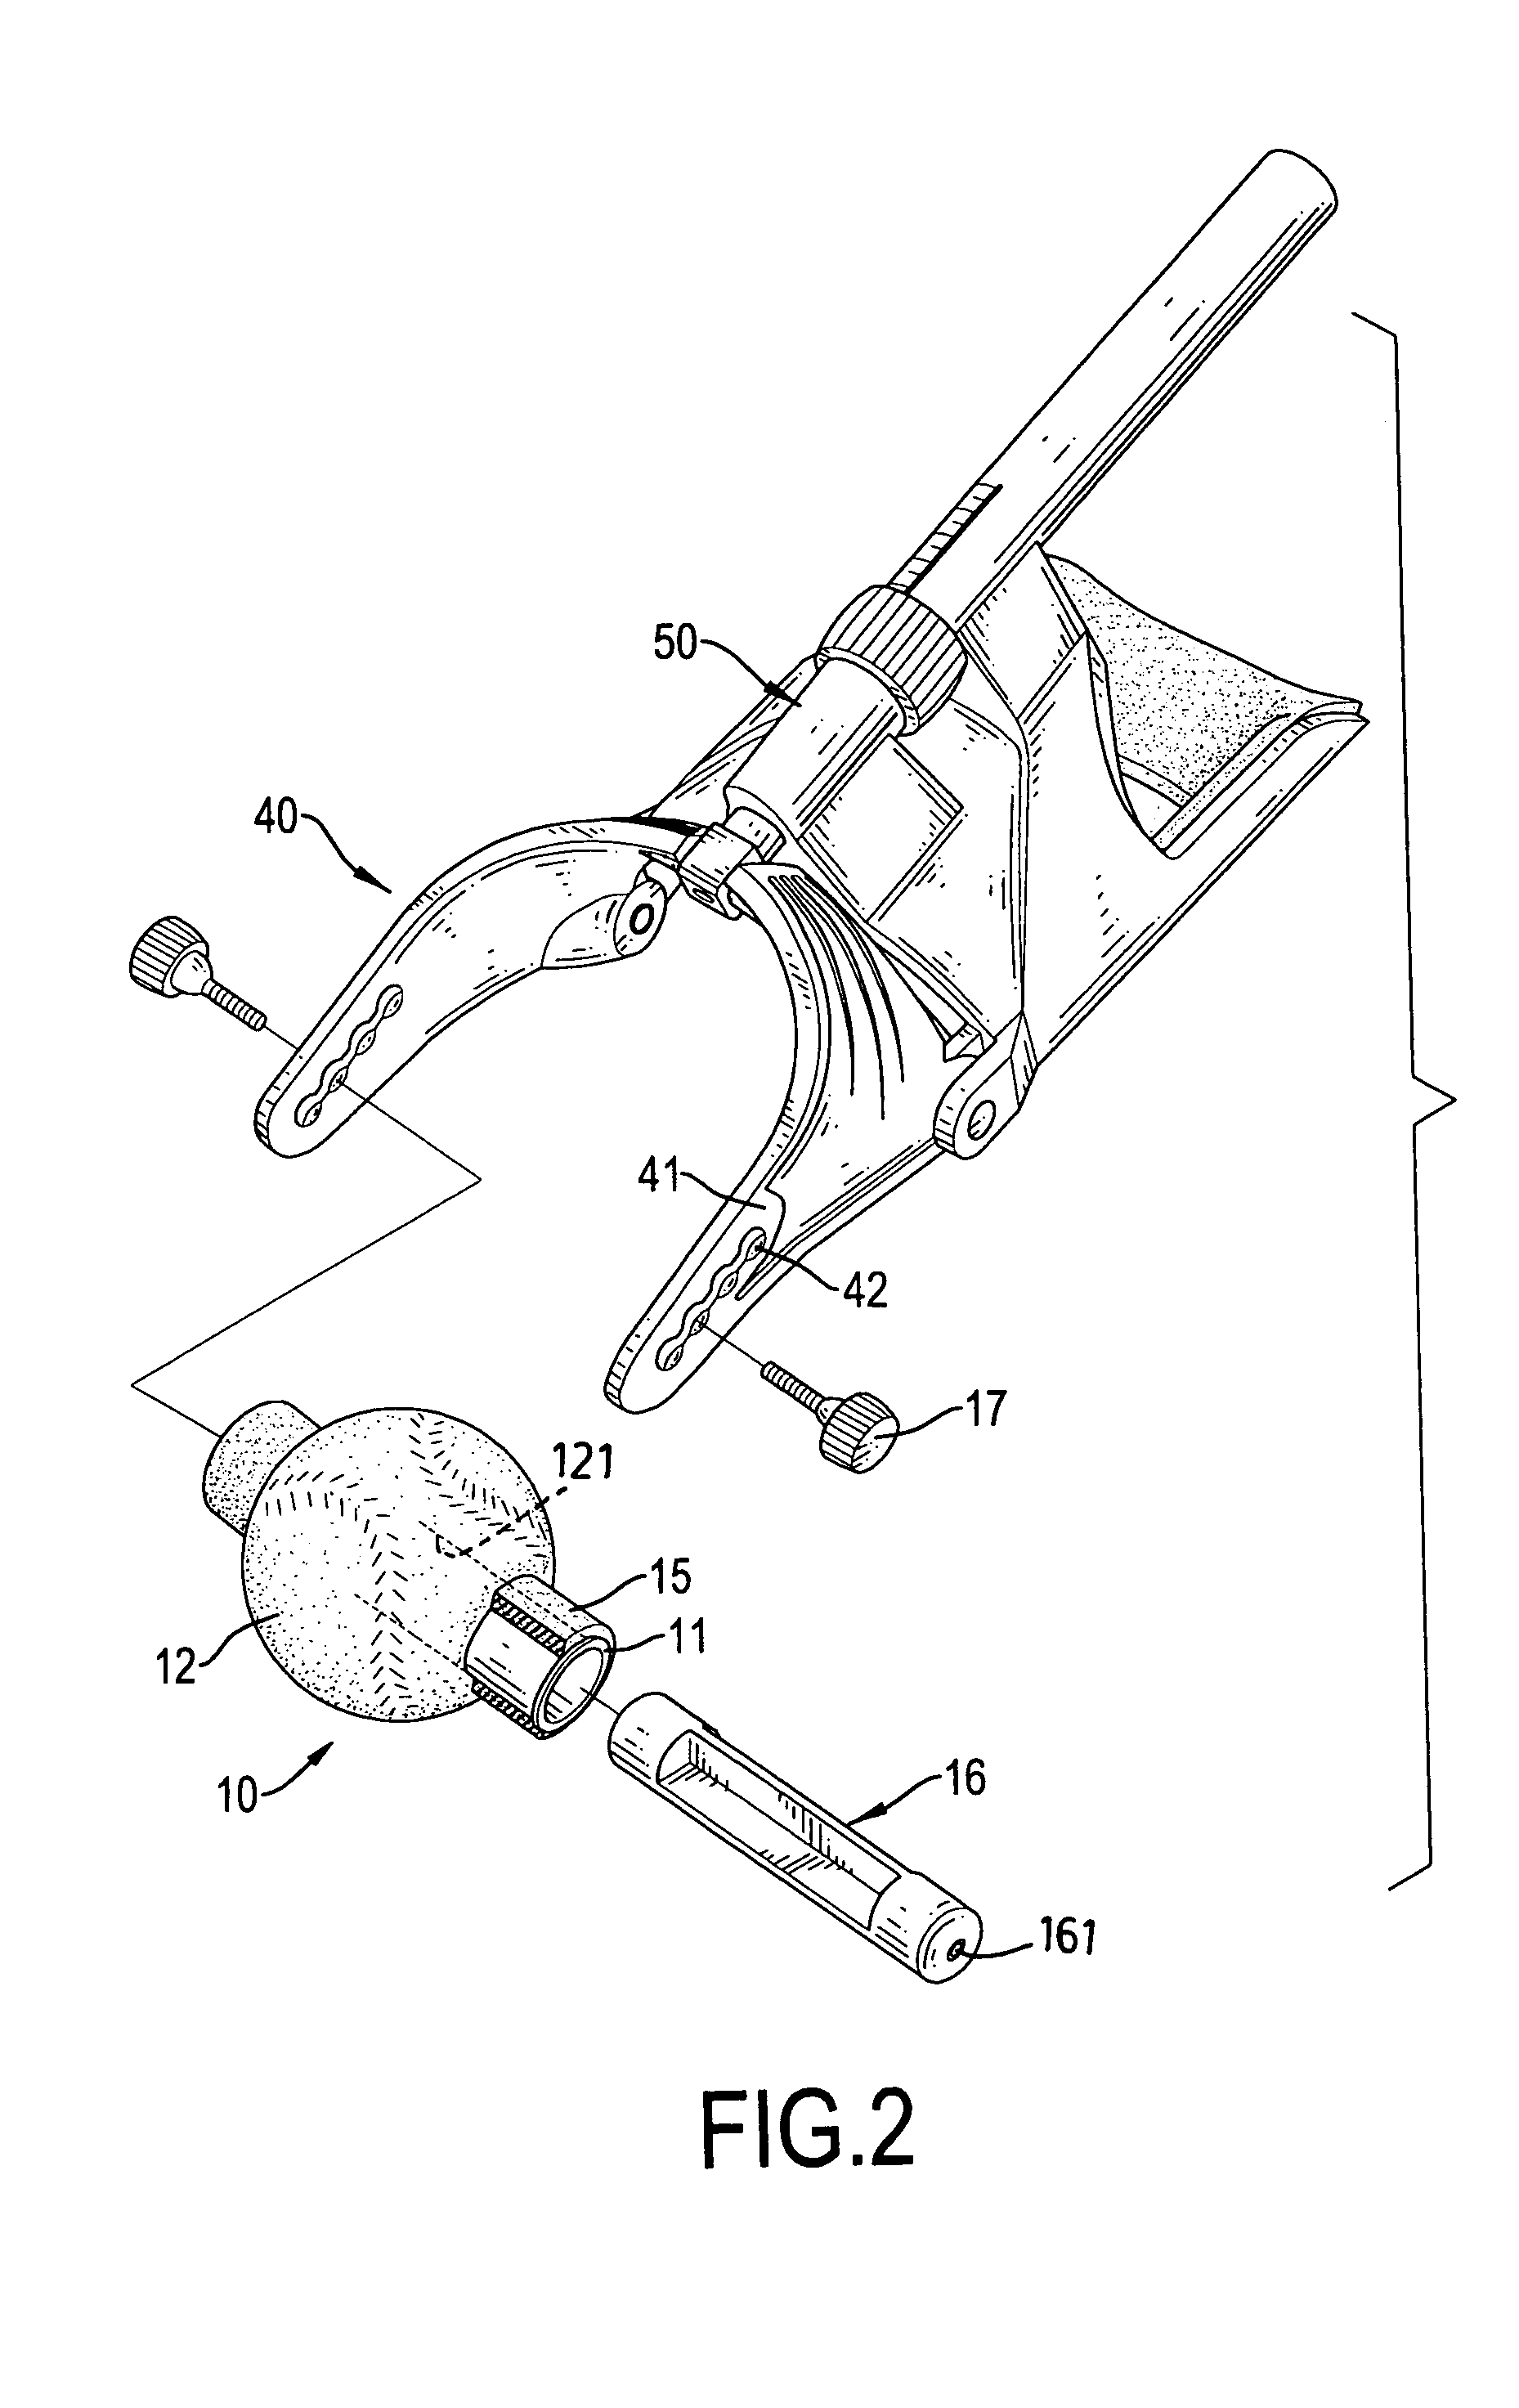 Apparatus with a raised grip for exercising wrist and forearm muscles